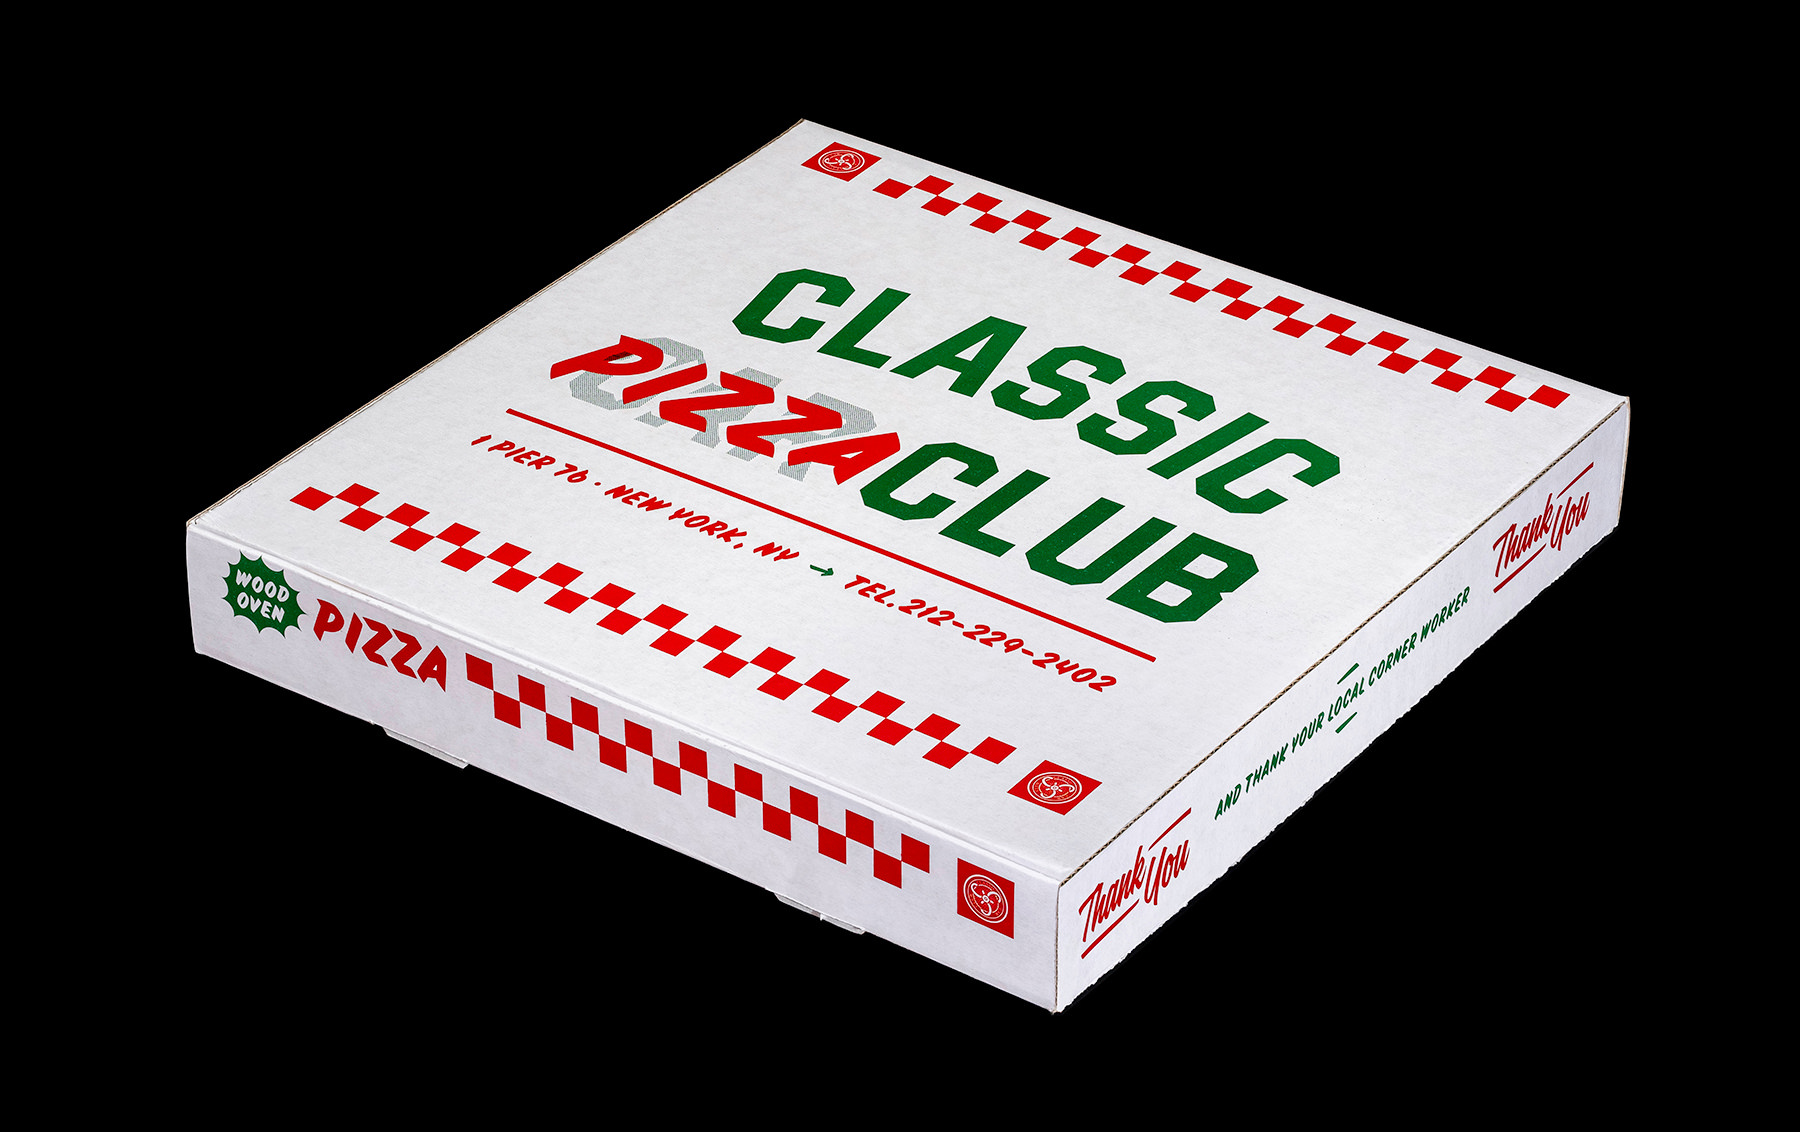 A three-quarter view of the custom designed pizza box. There is a checkered pattern and stylized typography in green and red on a white box.